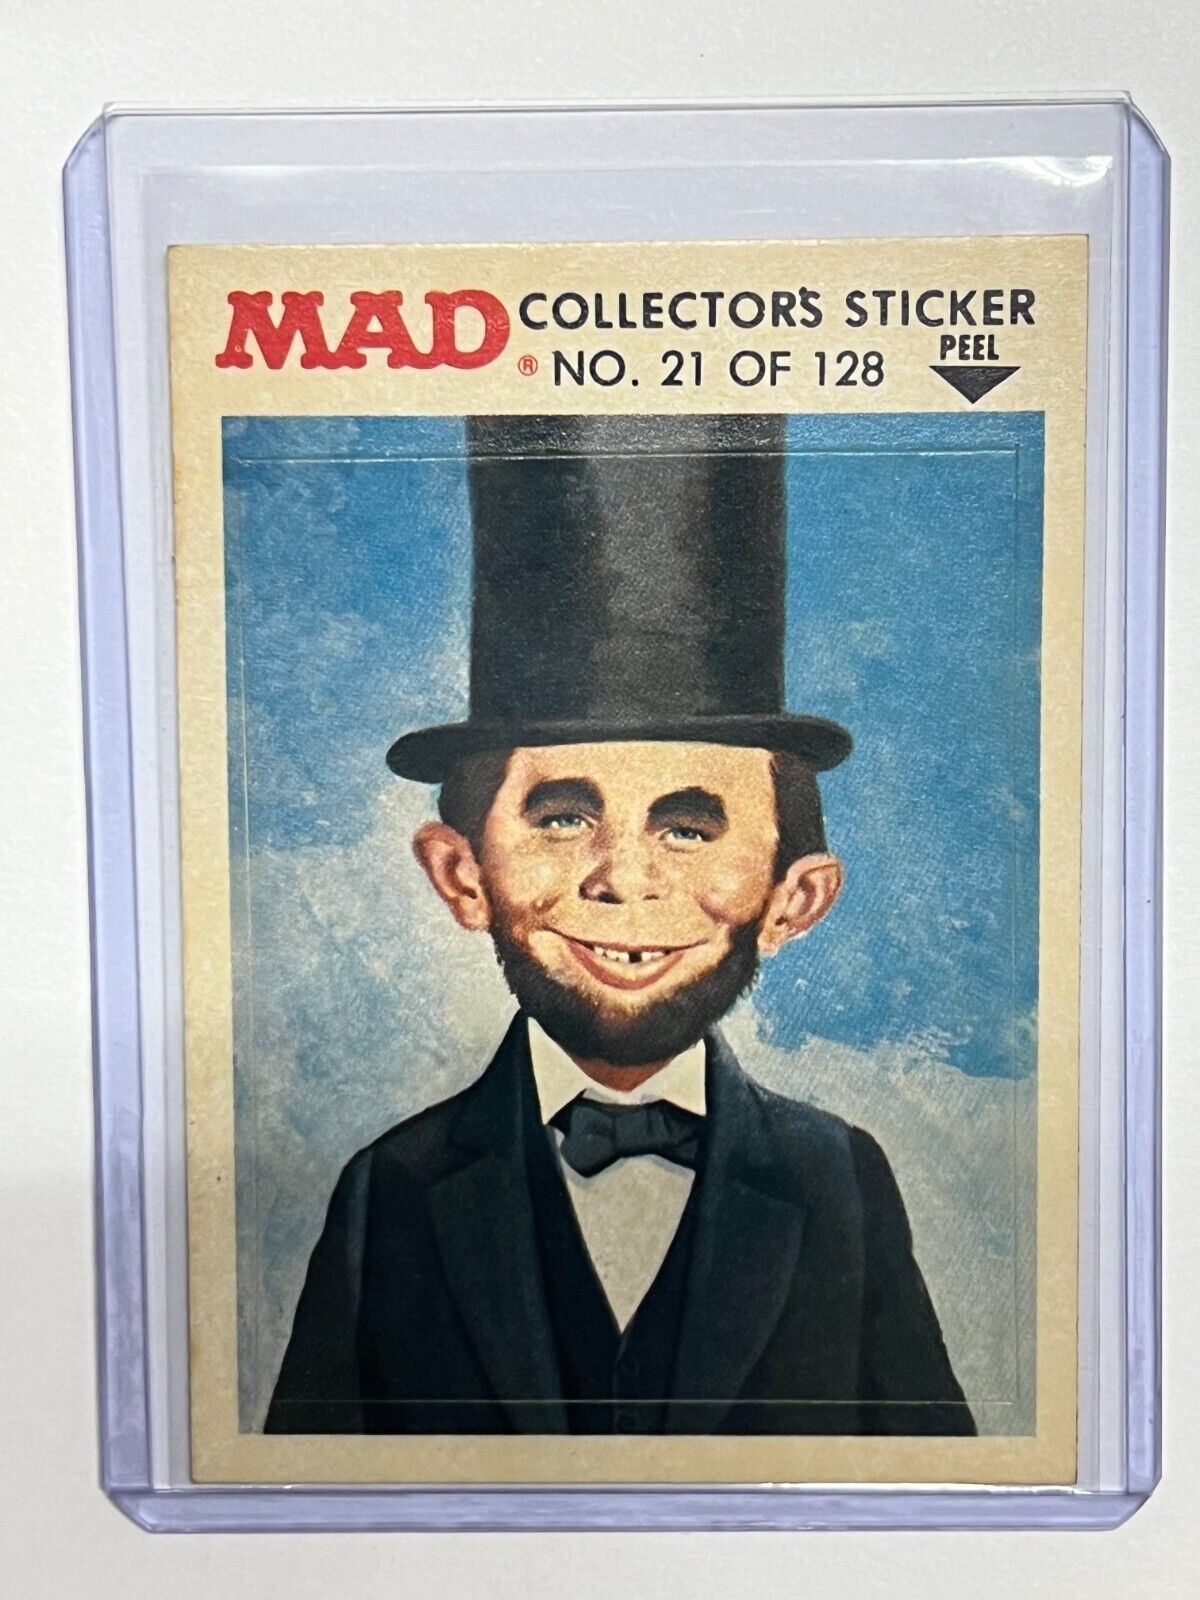 1983 Fleer Mad Stickers Trouble Stickers Alfred E Newman as Abe Lincoln #21 